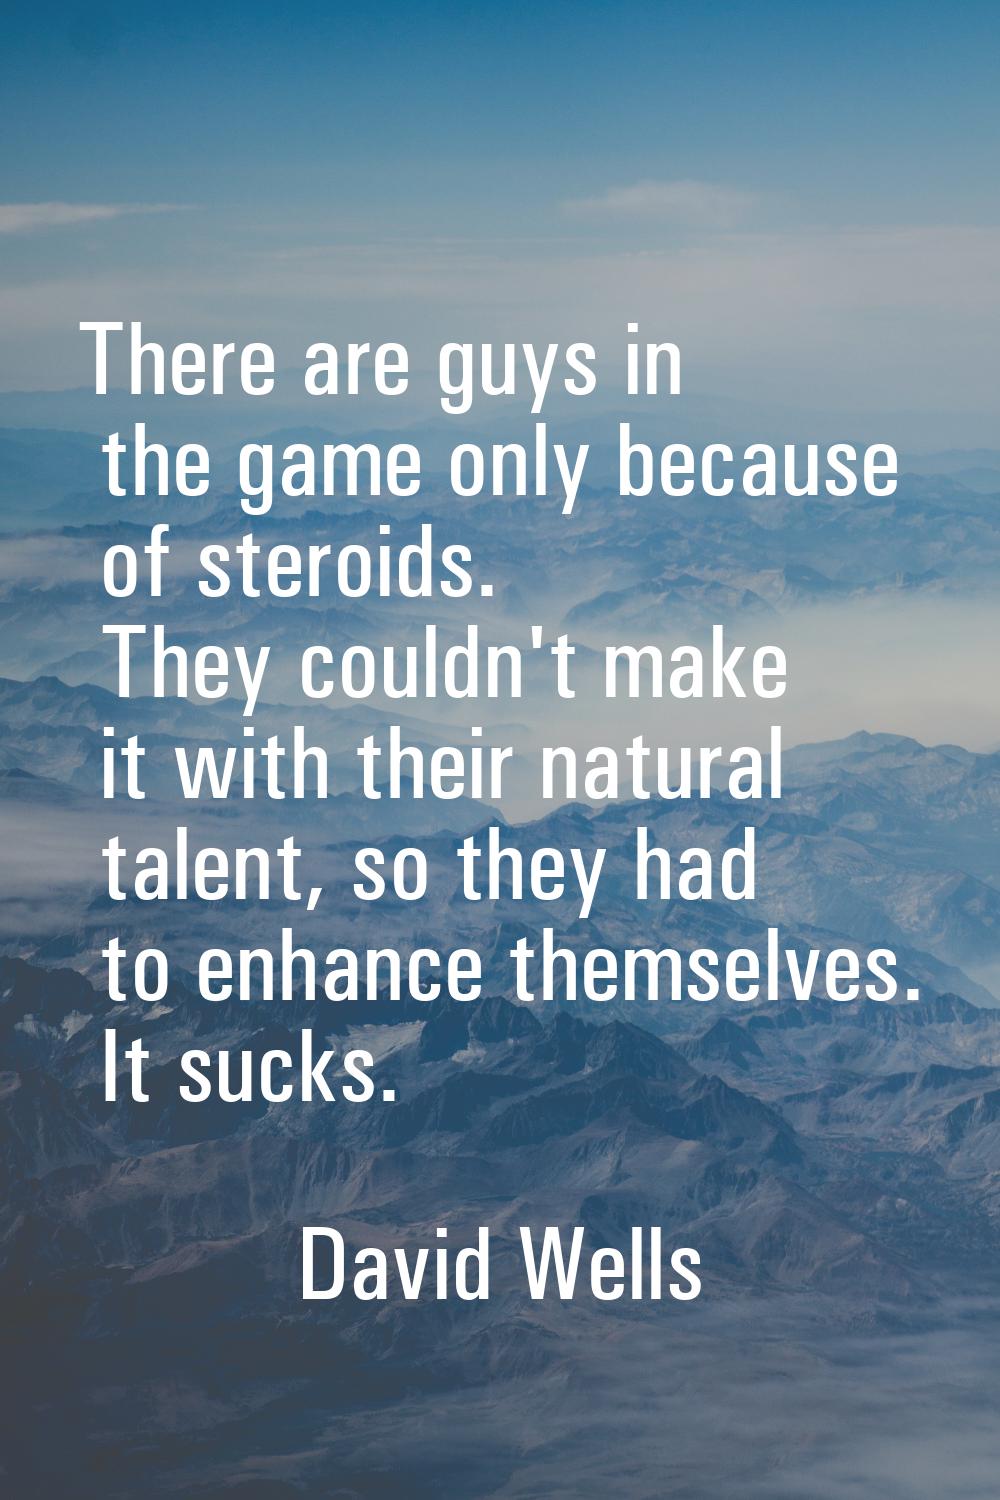 There are guys in the game only because of steroids. They couldn't make it with their natural talen